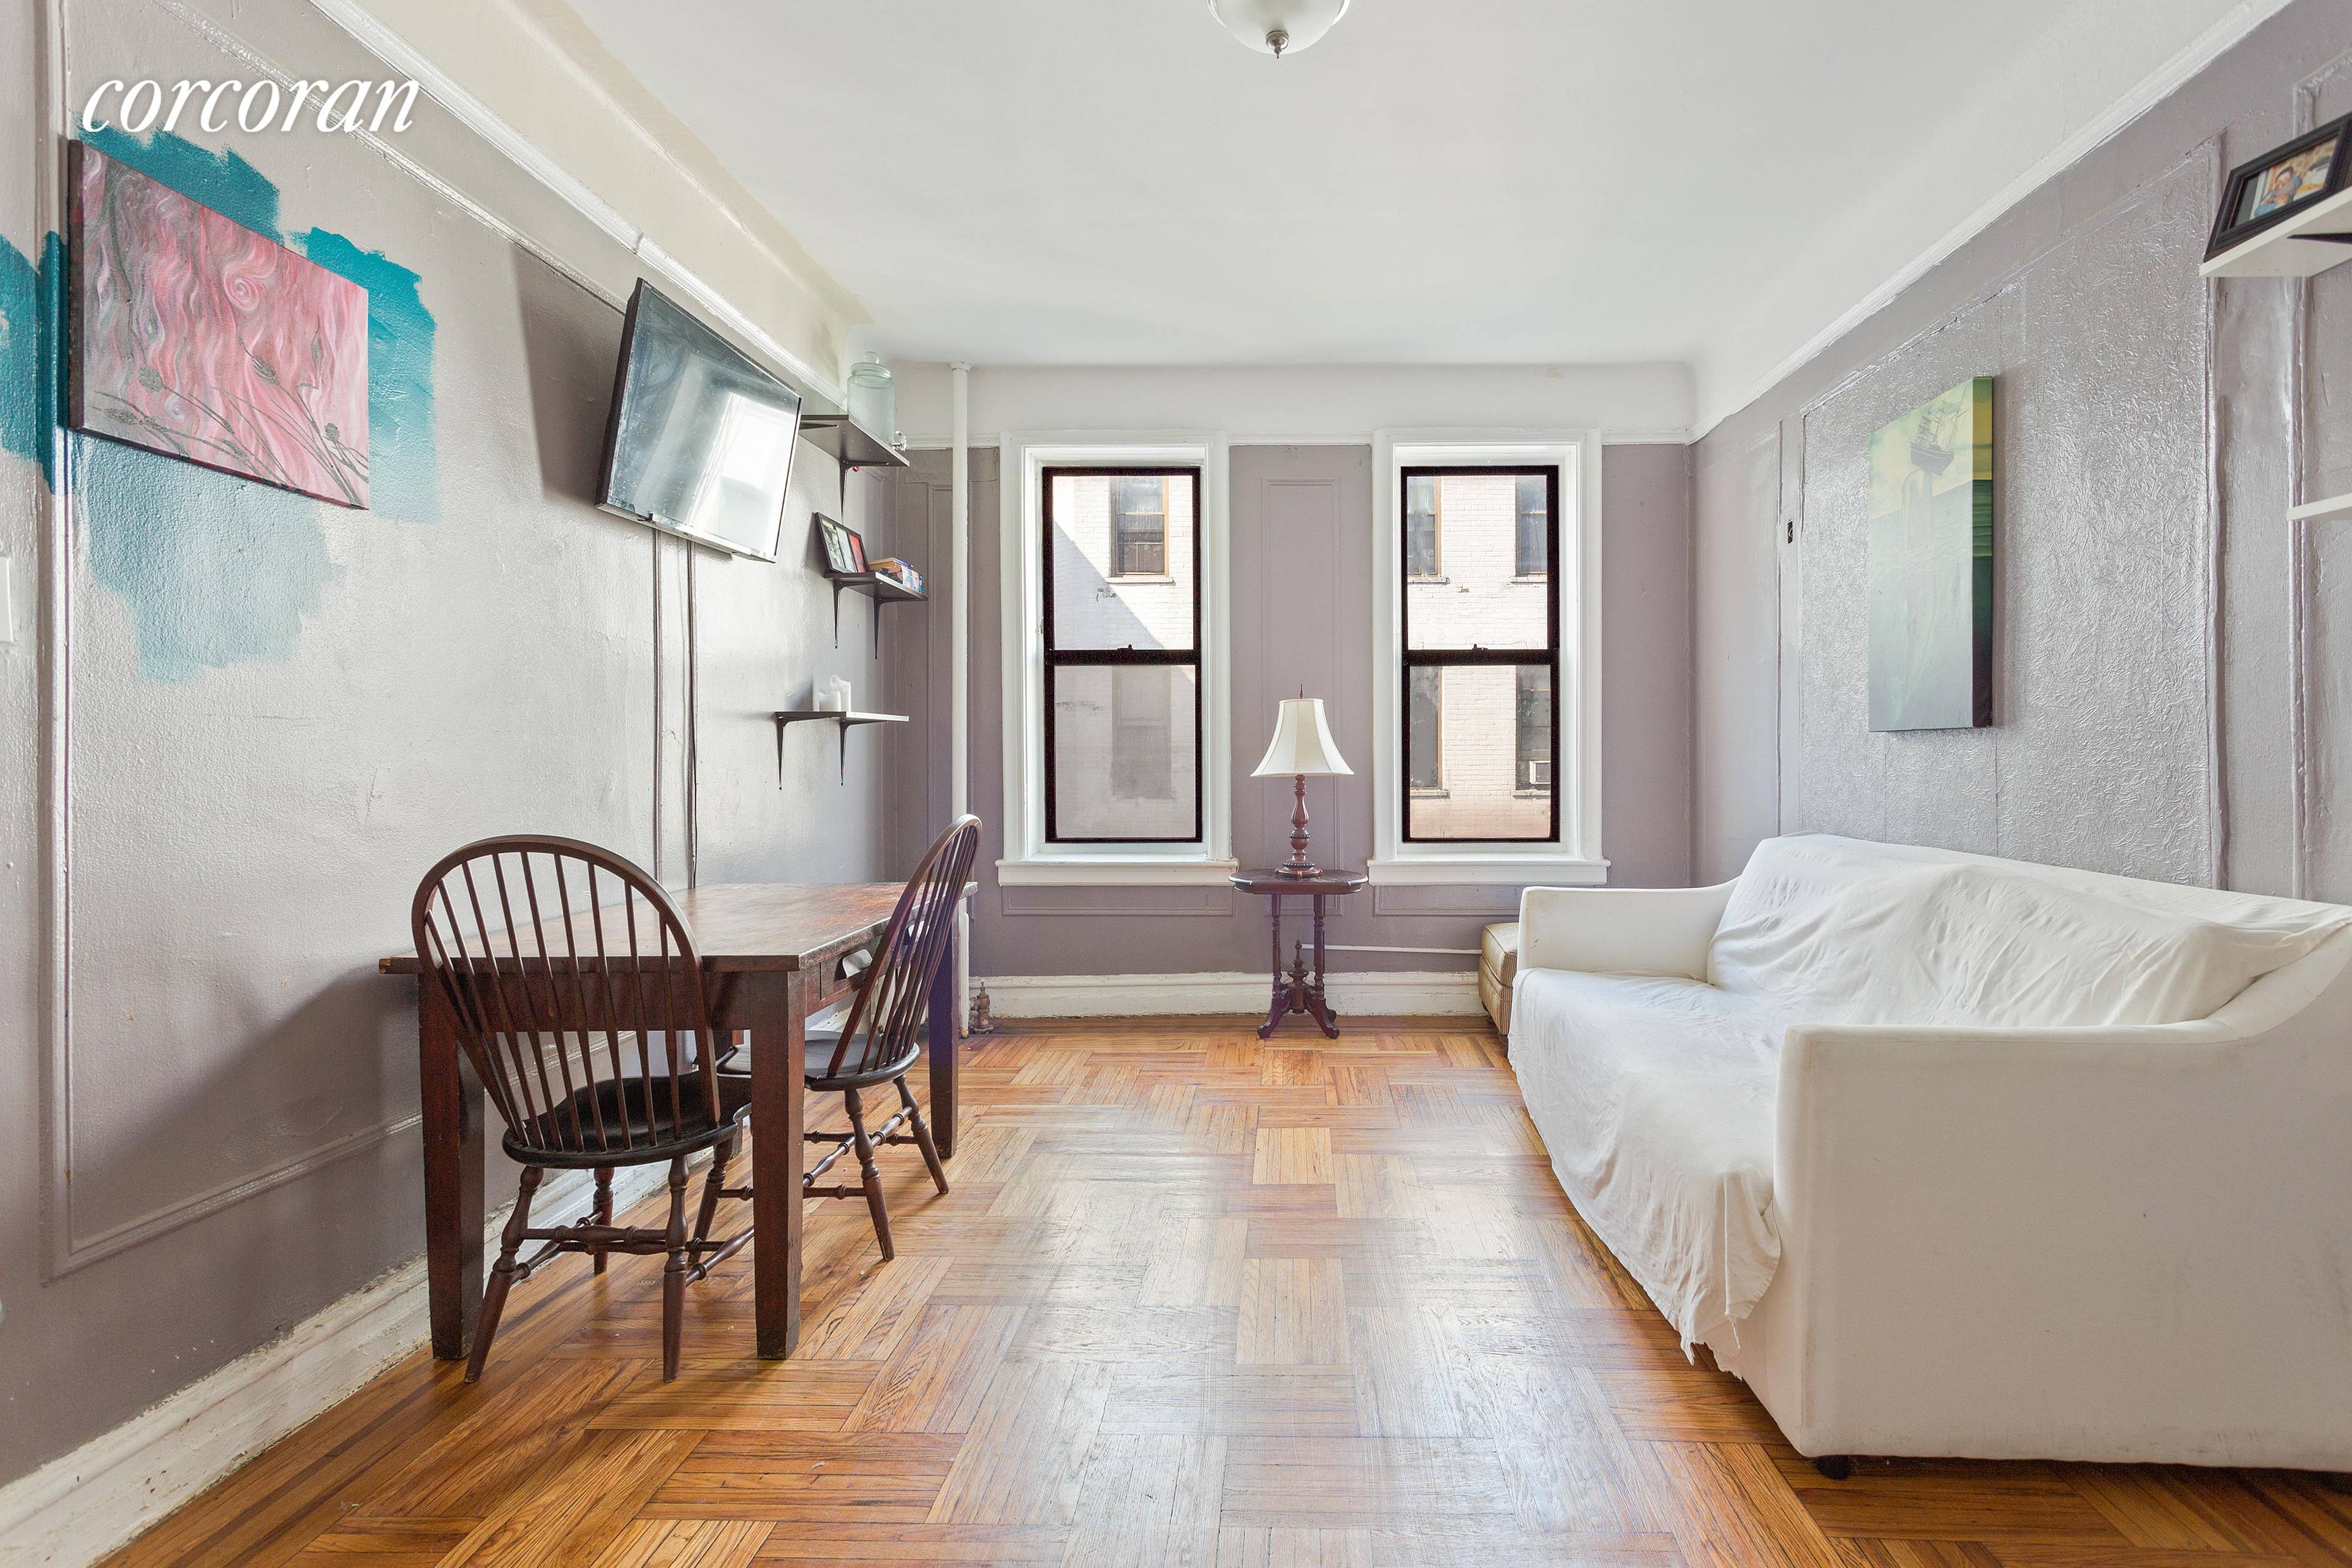 This Charming spacious 3 bedroom, 1 bathroom apartment is perfectly located in the heart of Crown Heights, right in the historic sub section known as Weeksville.